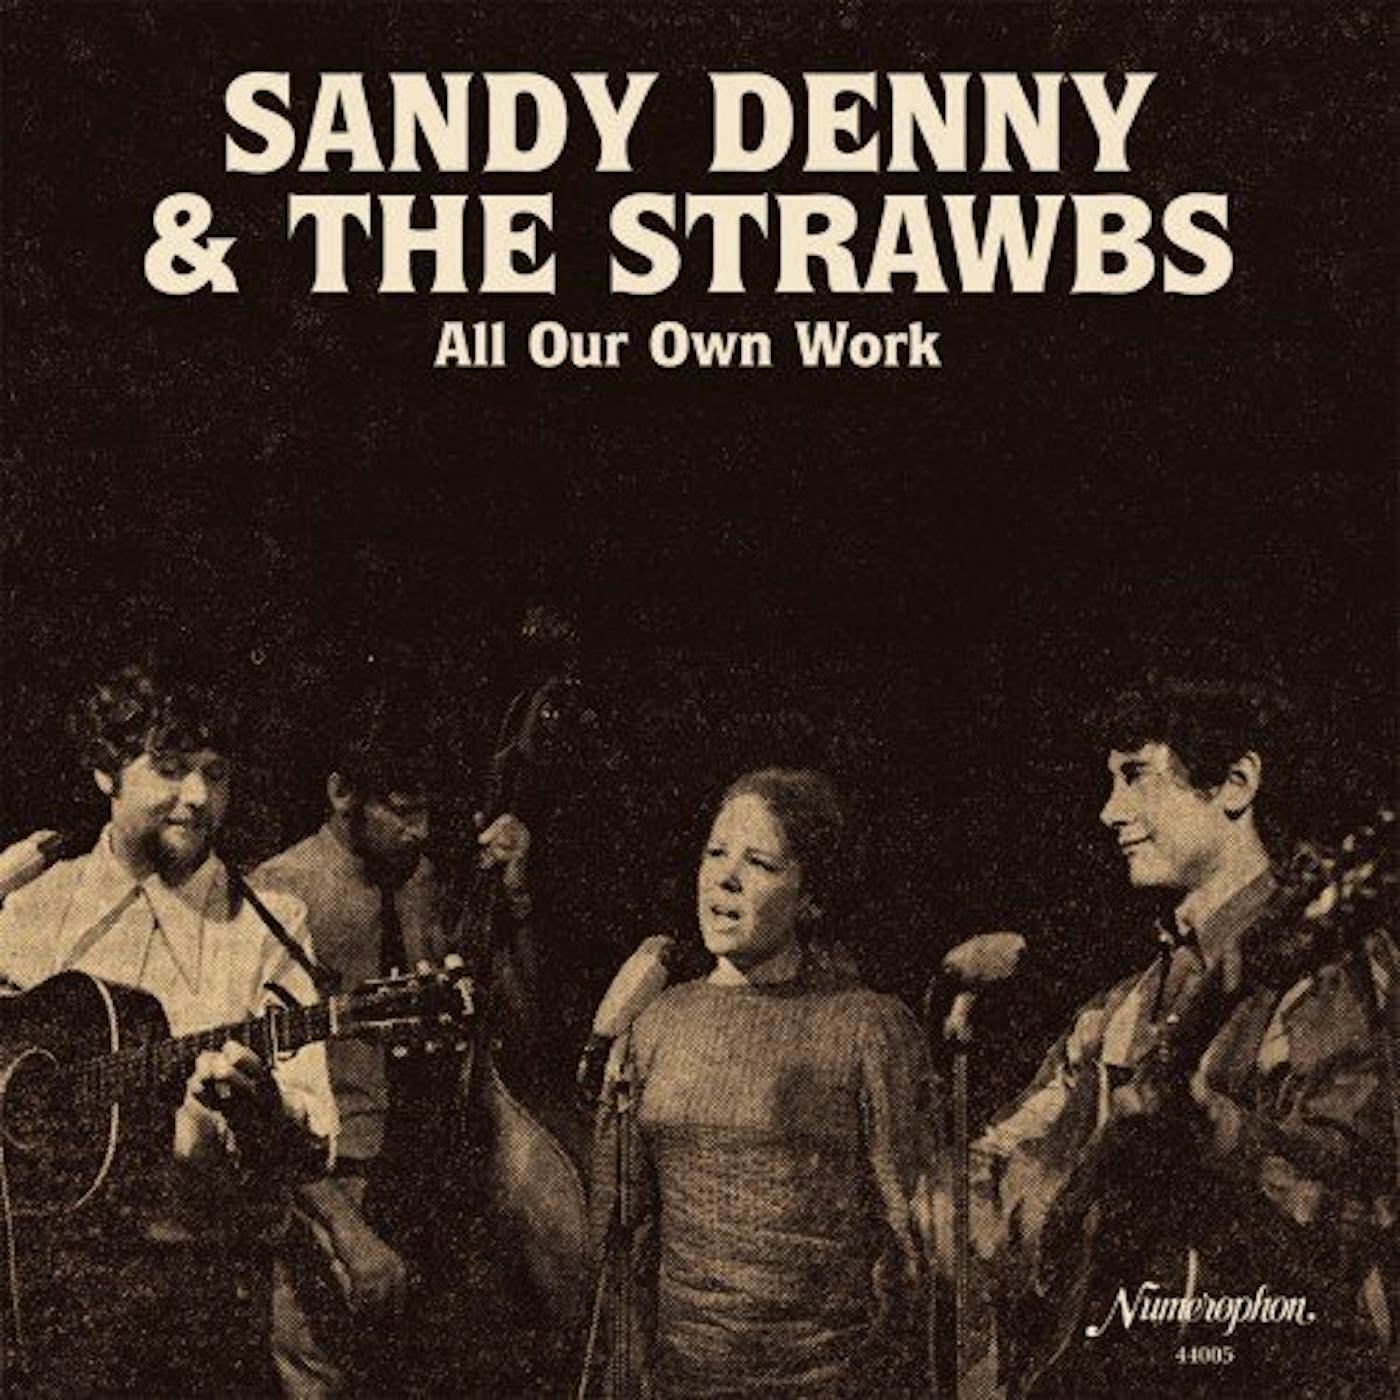 Sandy Denny & The Strawbs All Our Own Work Vinyl Record